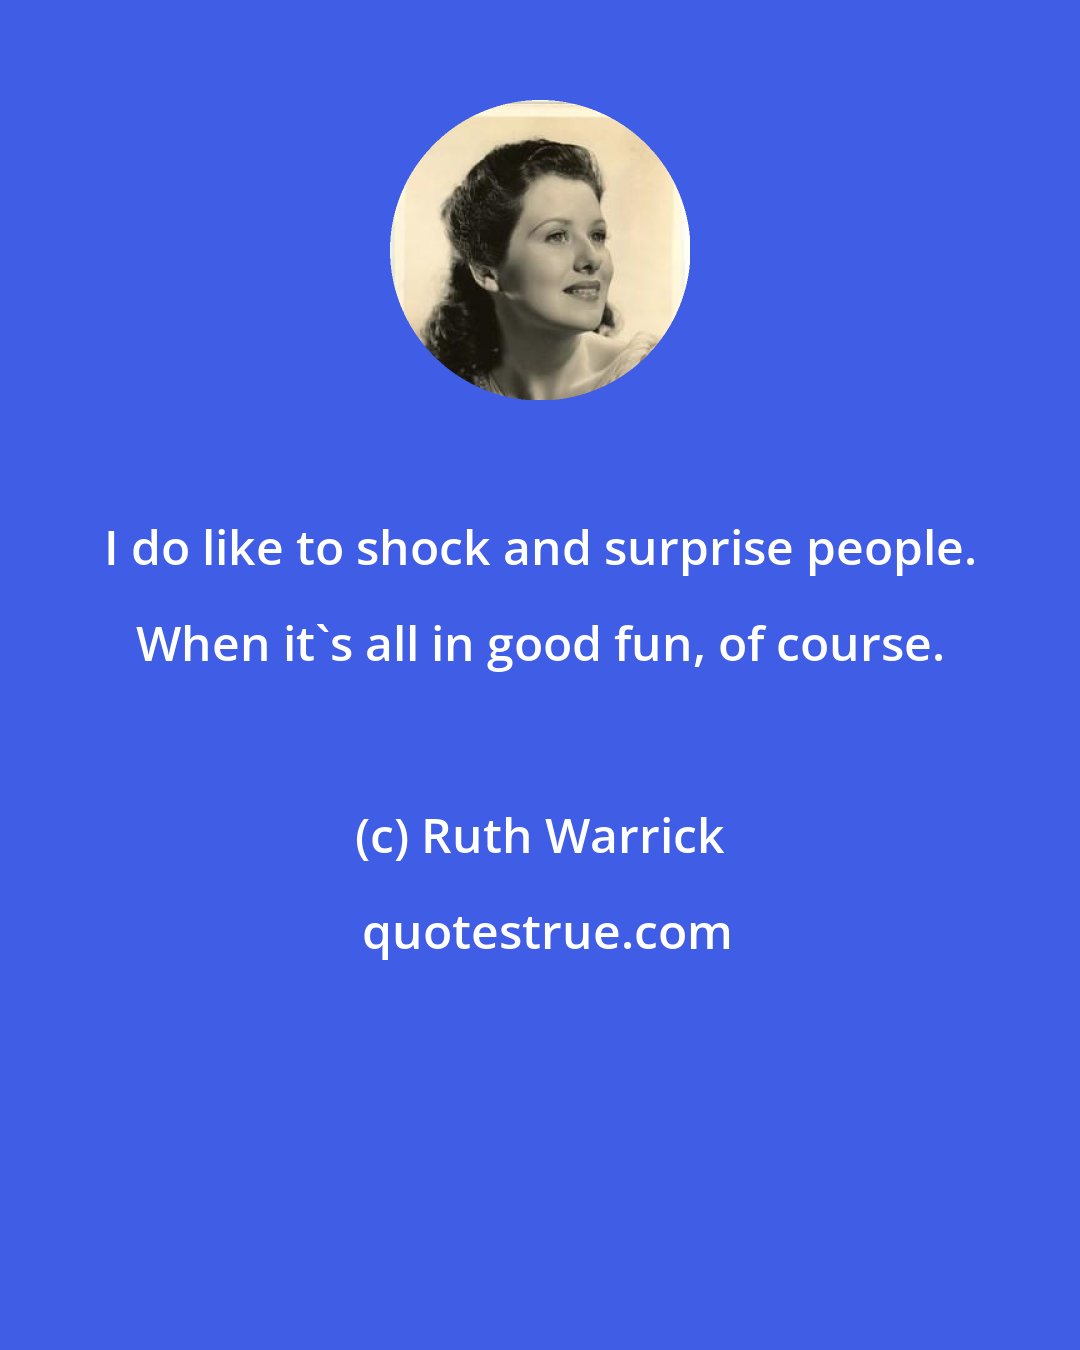 Ruth Warrick: I do like to shock and surprise people. When it's all in good fun, of course.